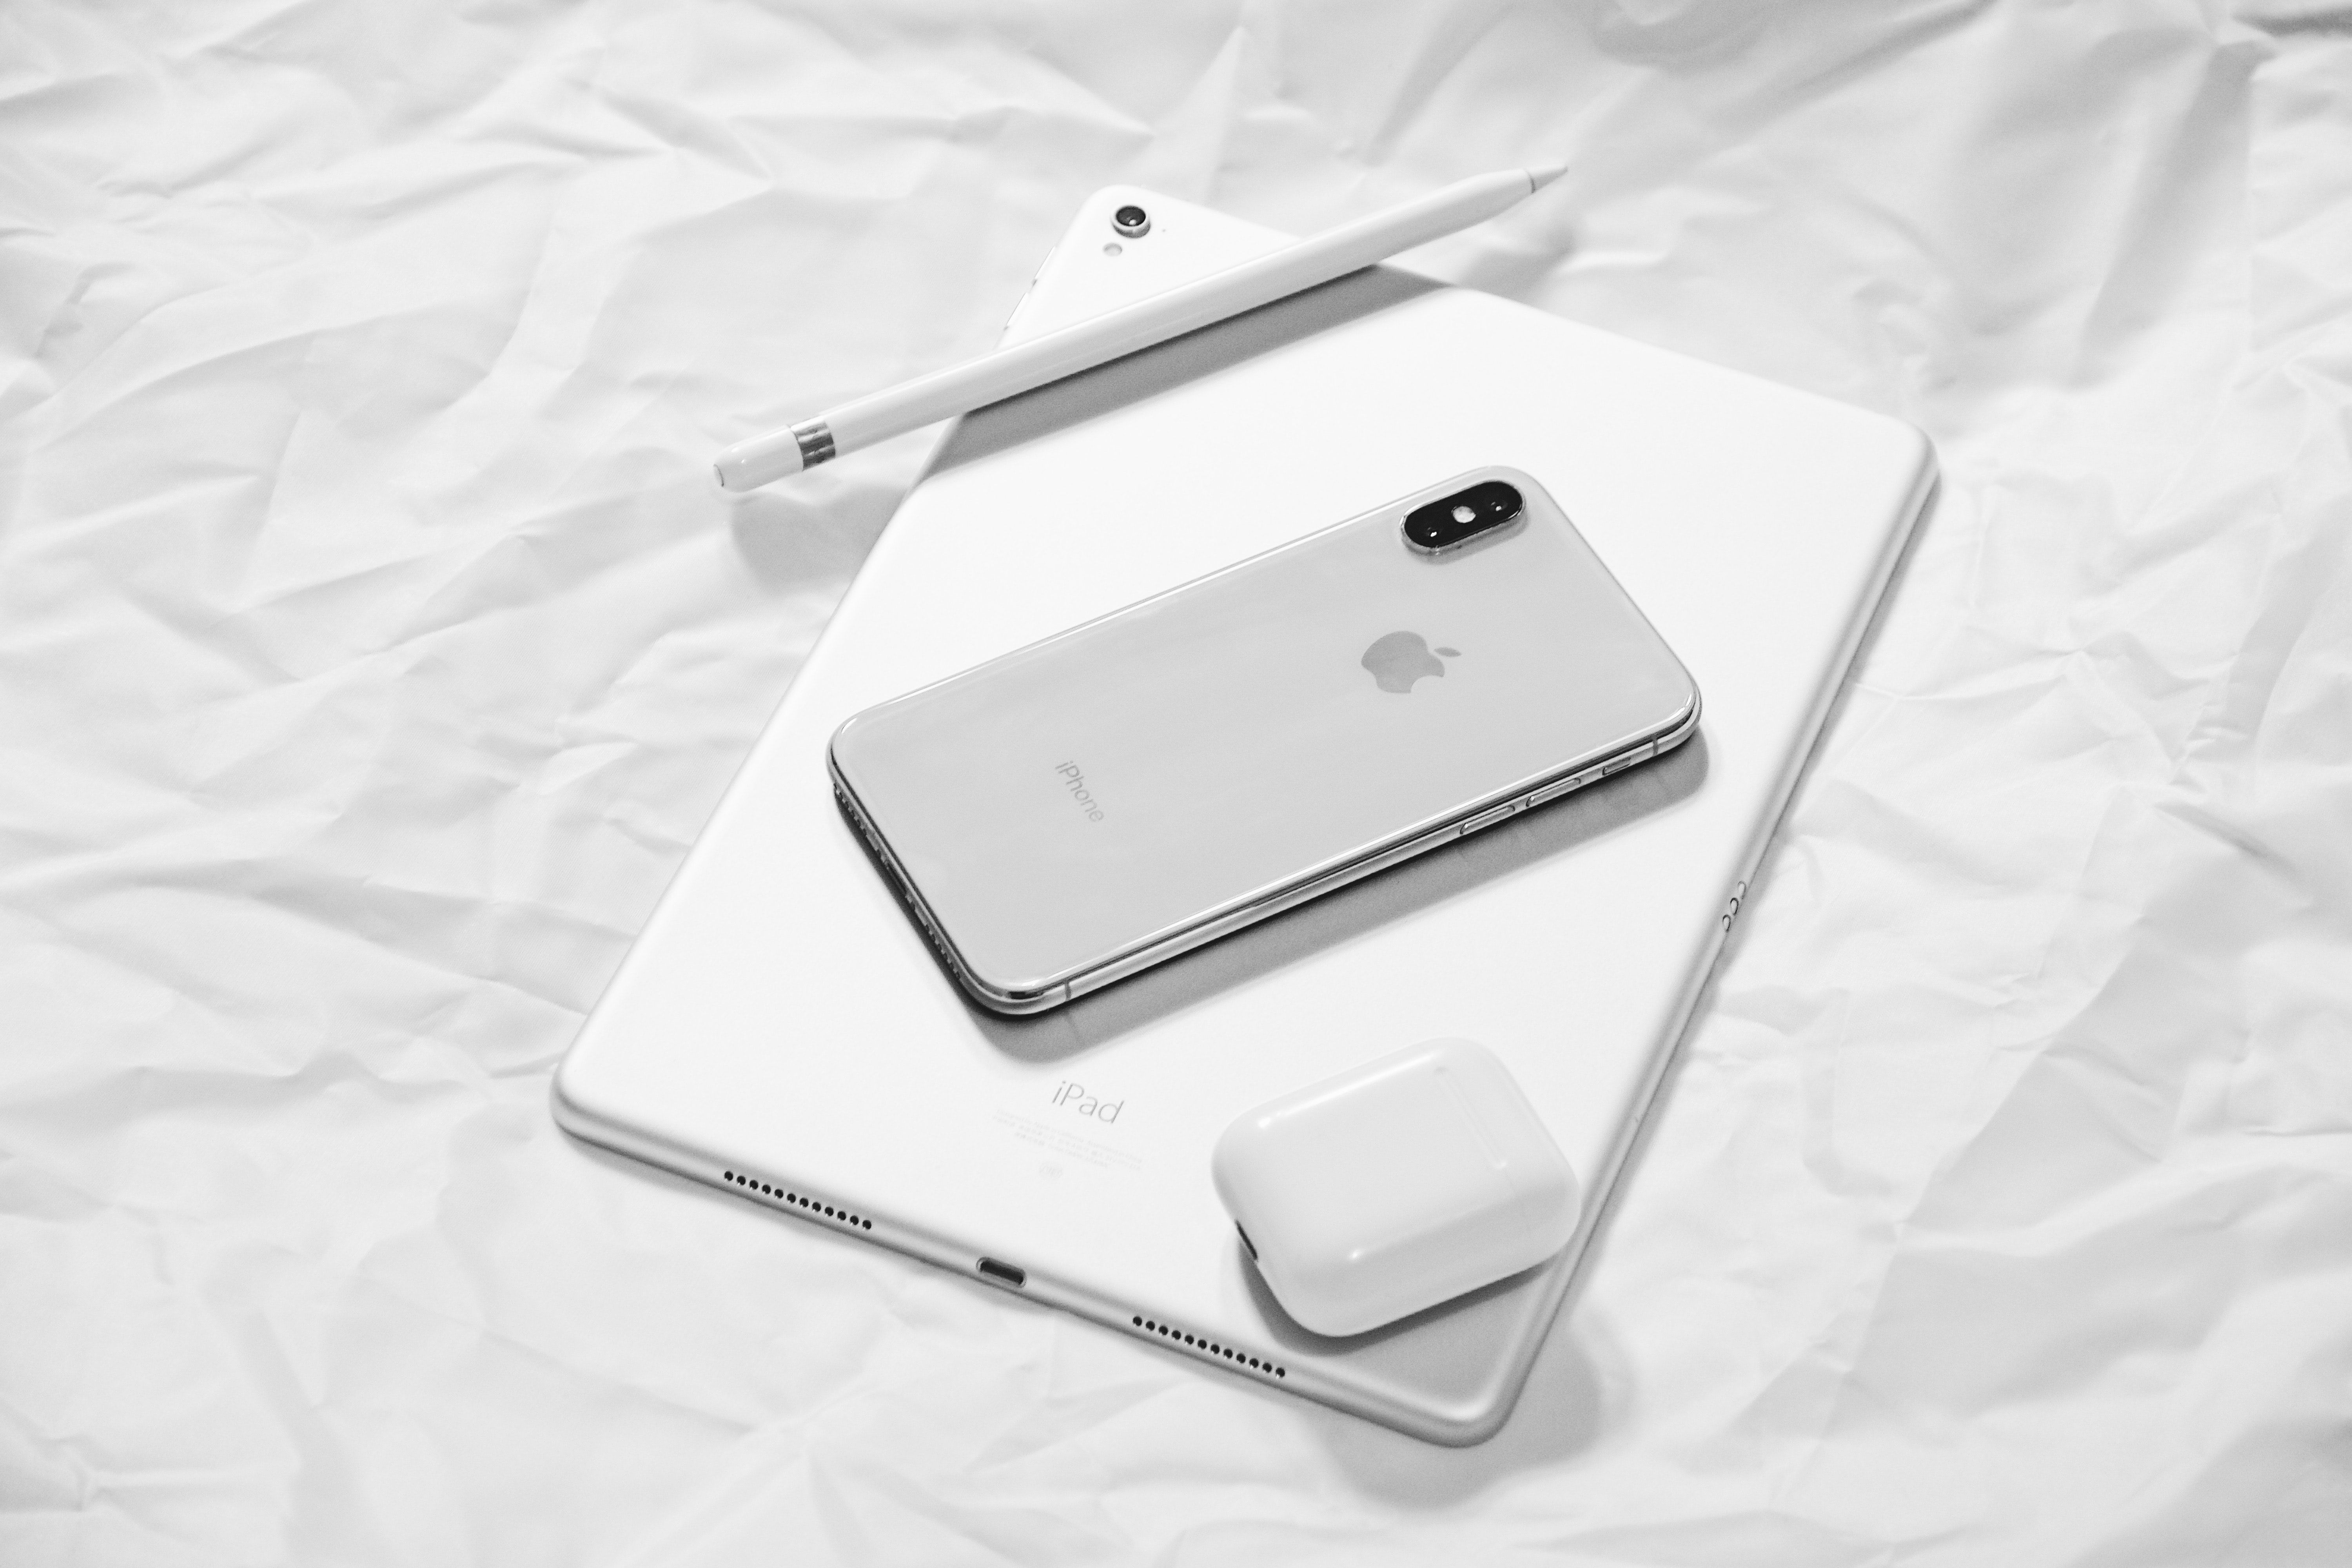 photo of an ipad and iphone together with some airpods 